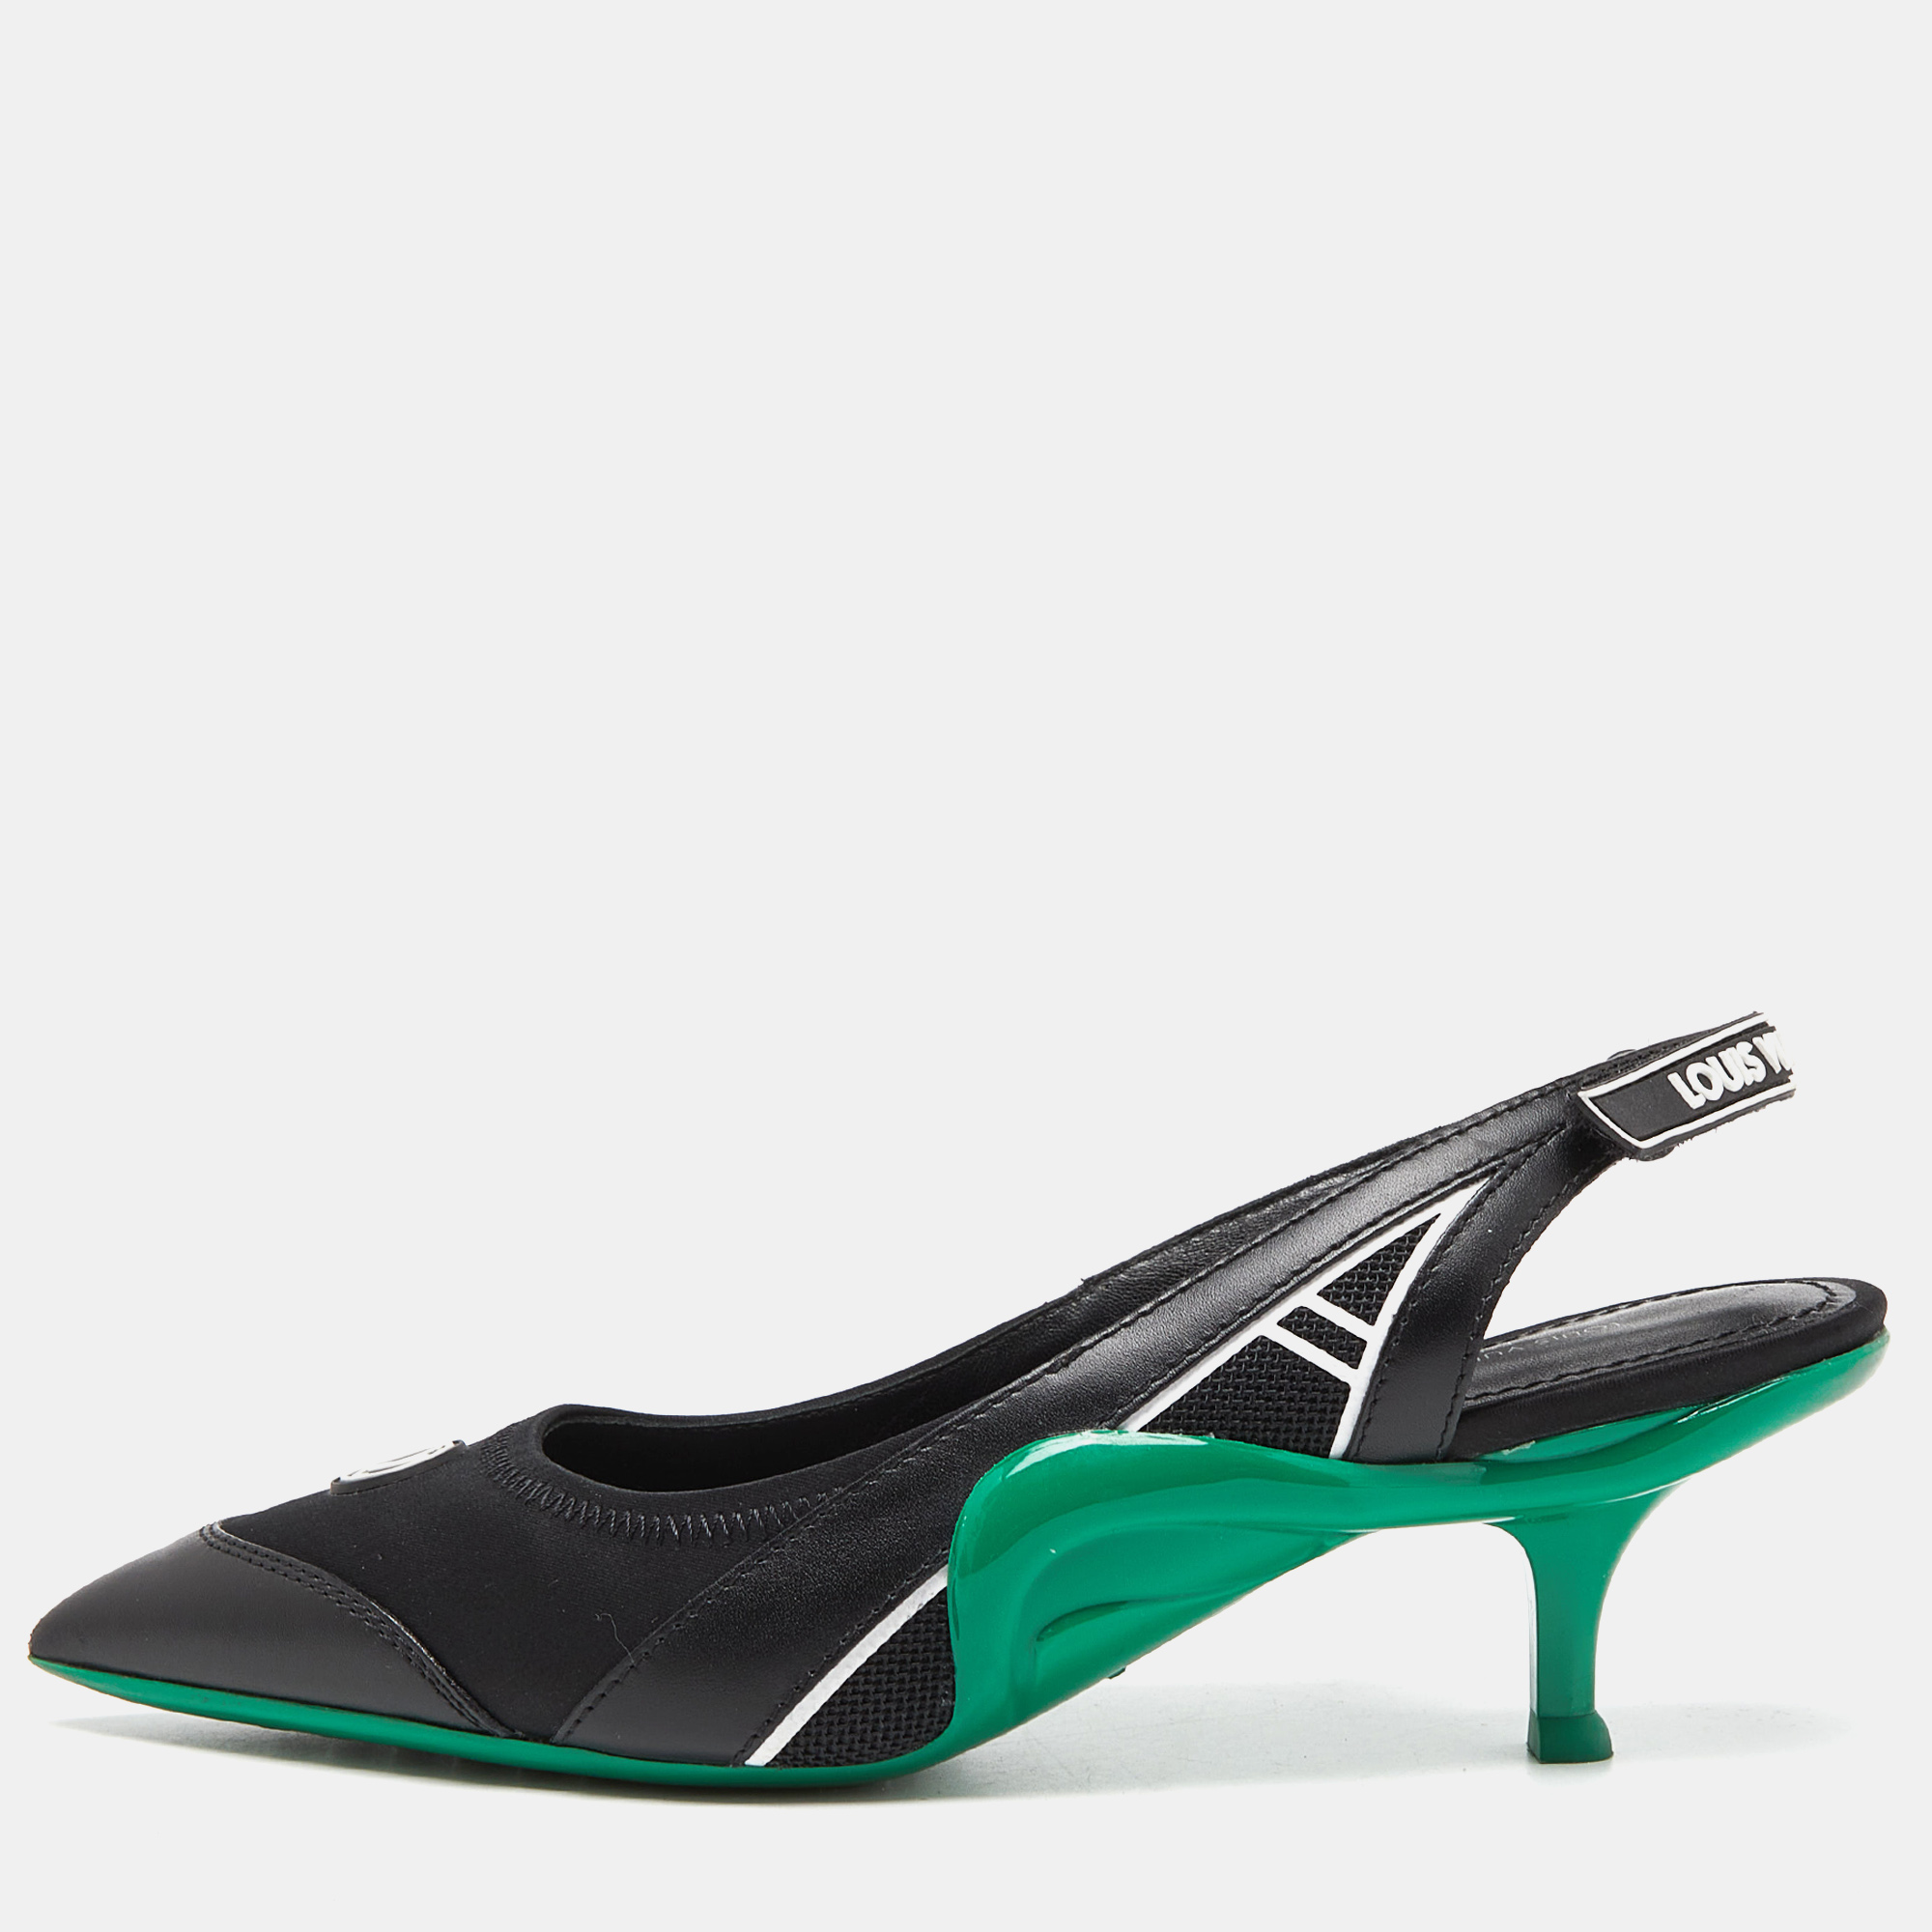 Louis vuitton black/green satin, mesh and leather archlight slingback pumps size 38